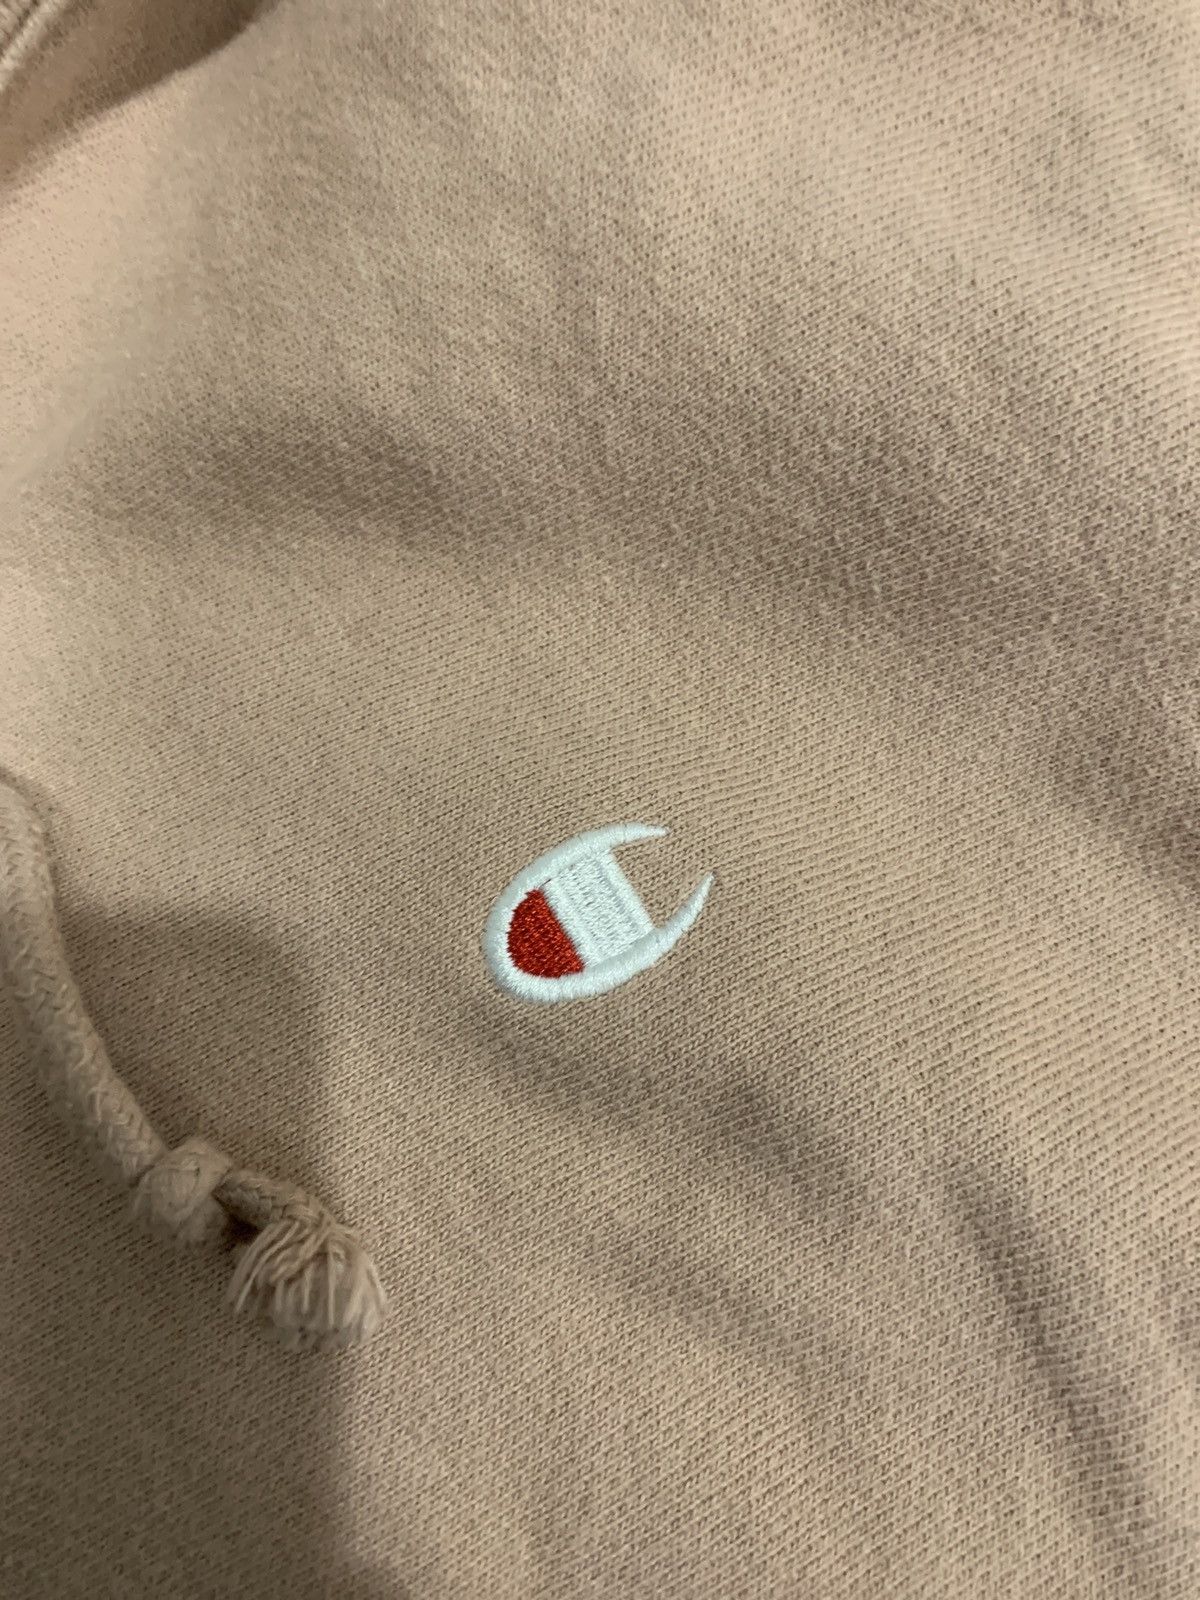 Champion Rose Gold Champion Hoodie Size US M / EU 48-50 / 2 - 2 Preview